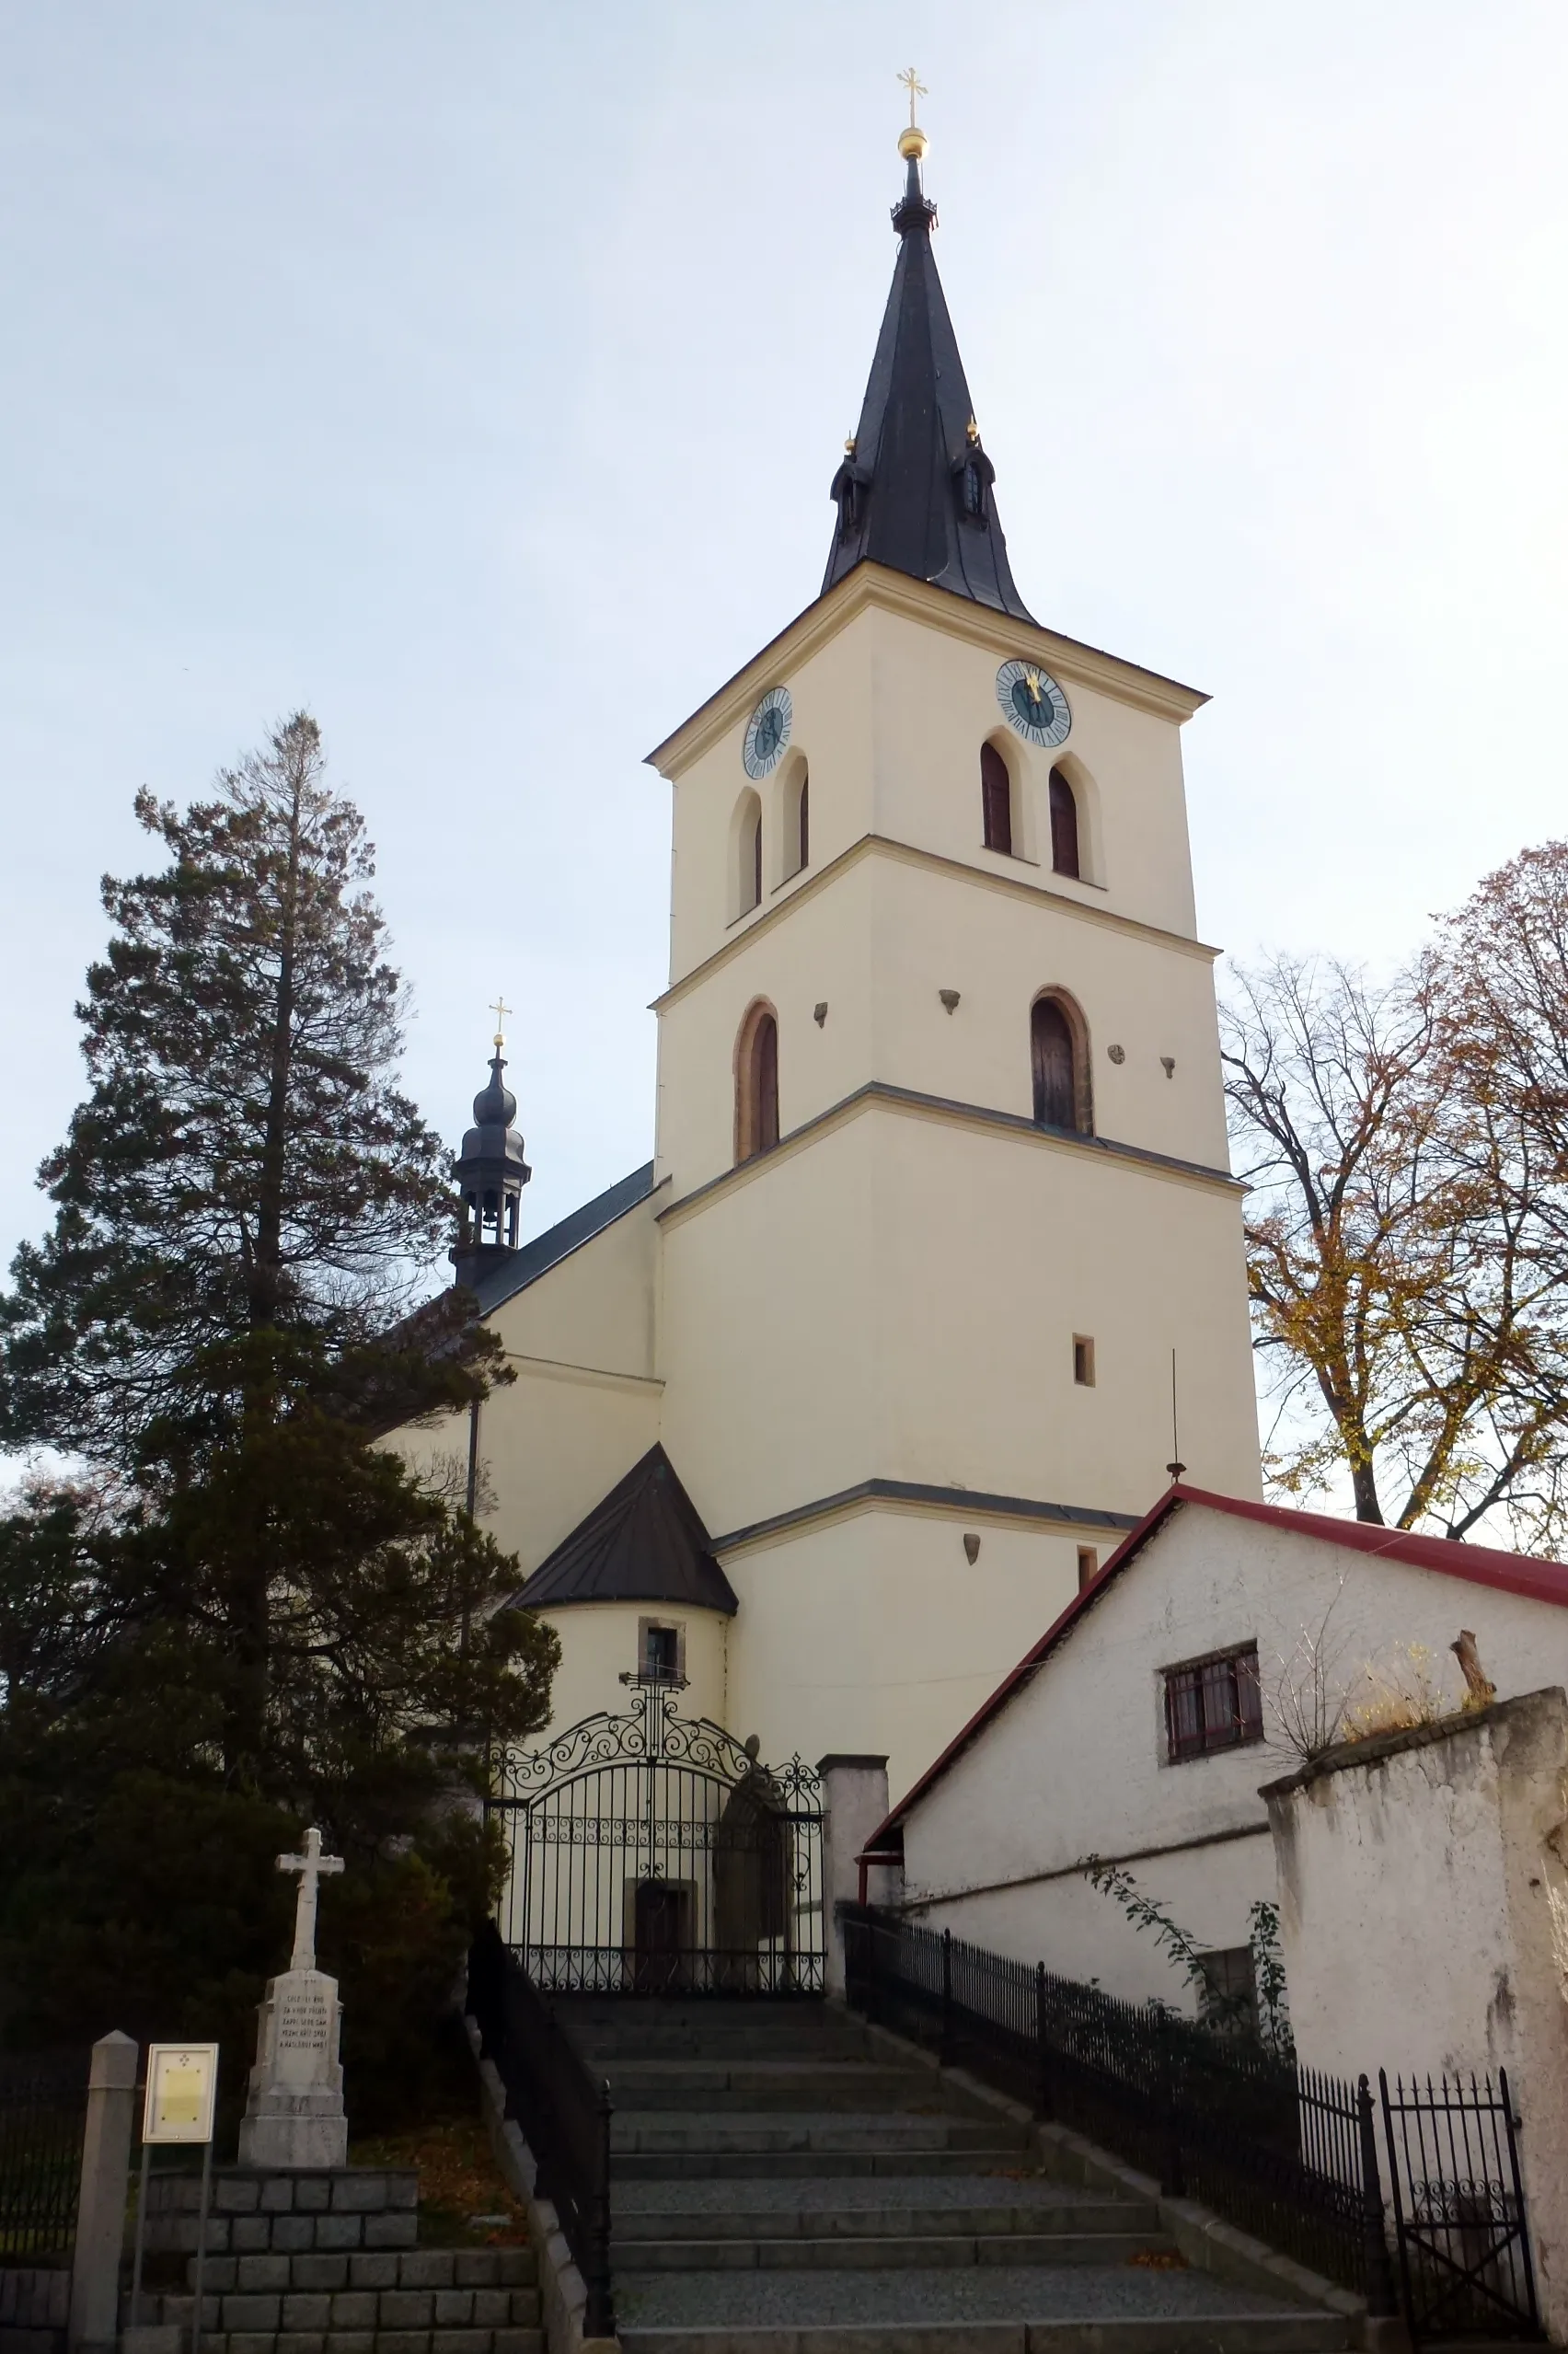 Photo showing: Church of the Assumption of Virgin Mary in Skuteč. Photo location - Czechia, Skuteč, Palacky Square.